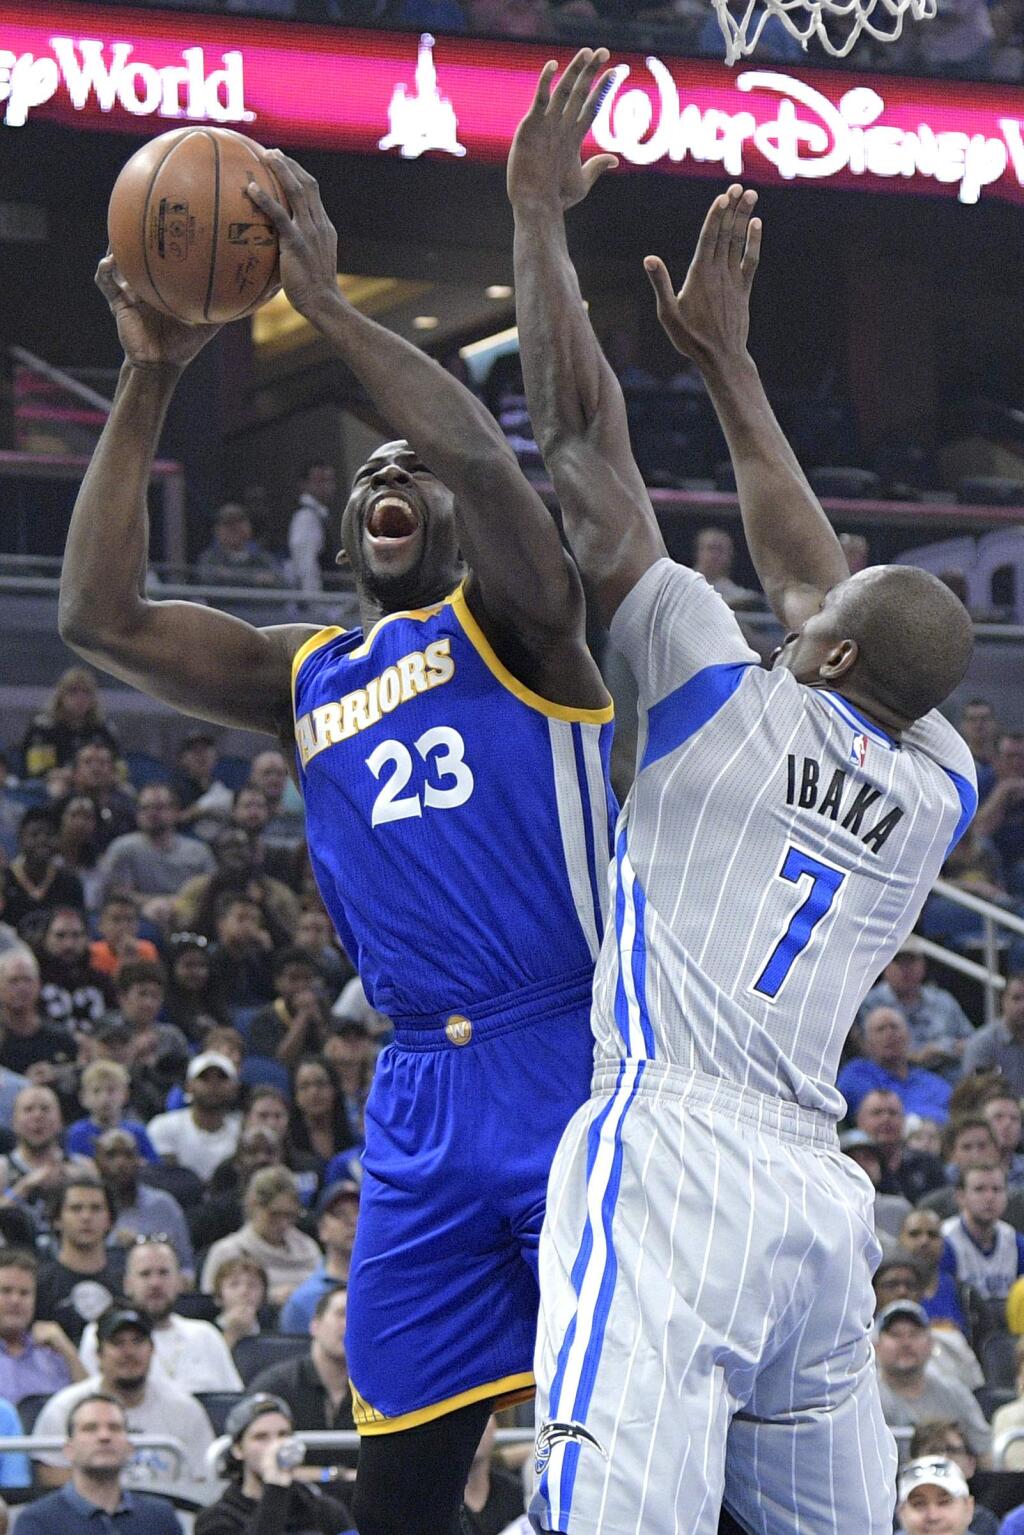 Golden State Warriors forward Draymond Green (23) is fouled by Orlando Magic forward Serge Ibaka (7) while going up for a shot during the first half of an NBA basketball game in Orlando, Fla., Sunday, Jan. 22, 2017. (AP Photo/Phelan M. Ebenhack)